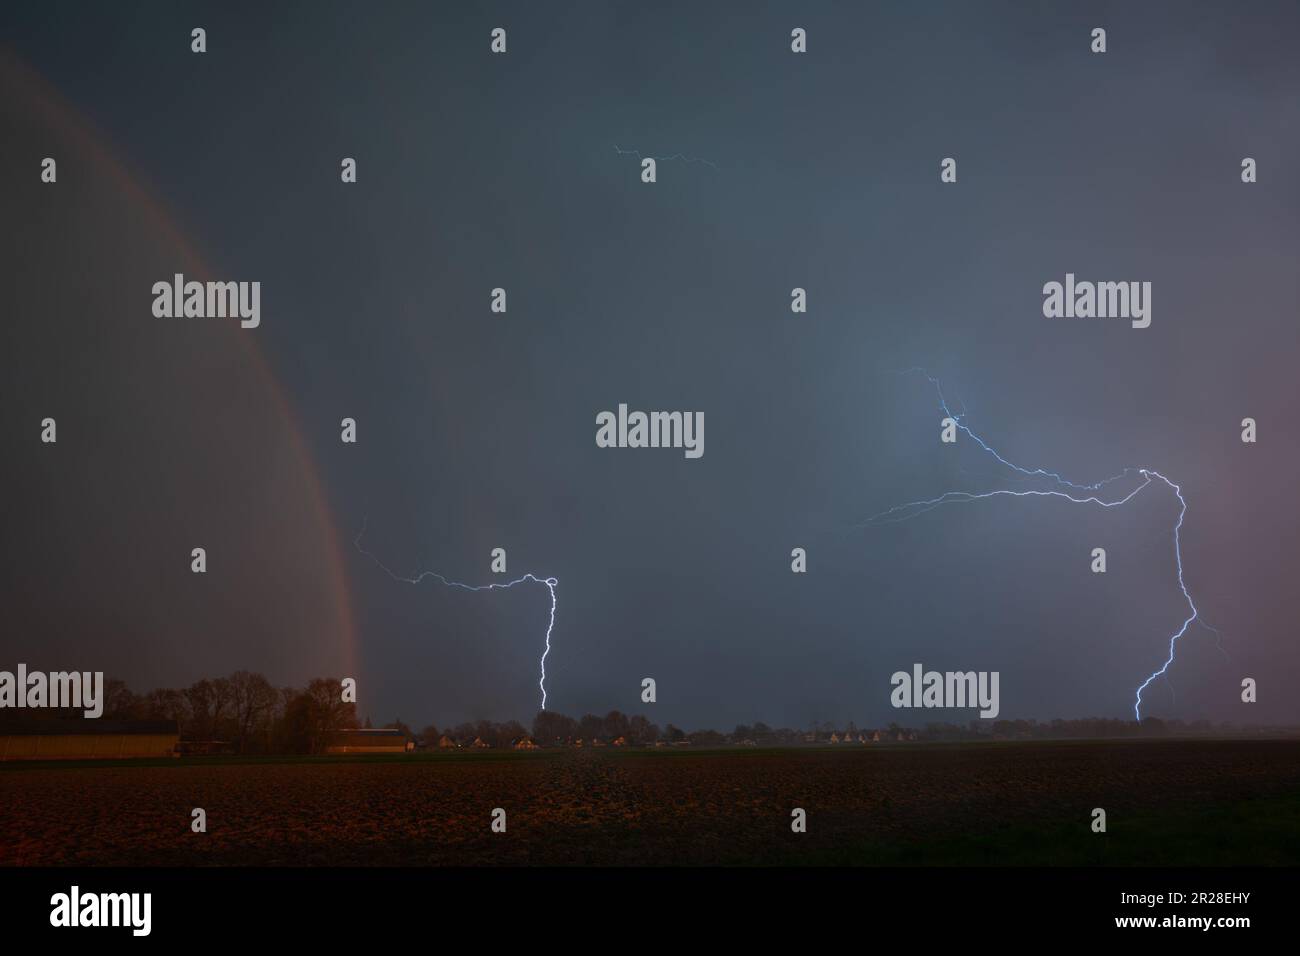 Dramatic view of a lightning storm with rainbow over the plains Stock Photo